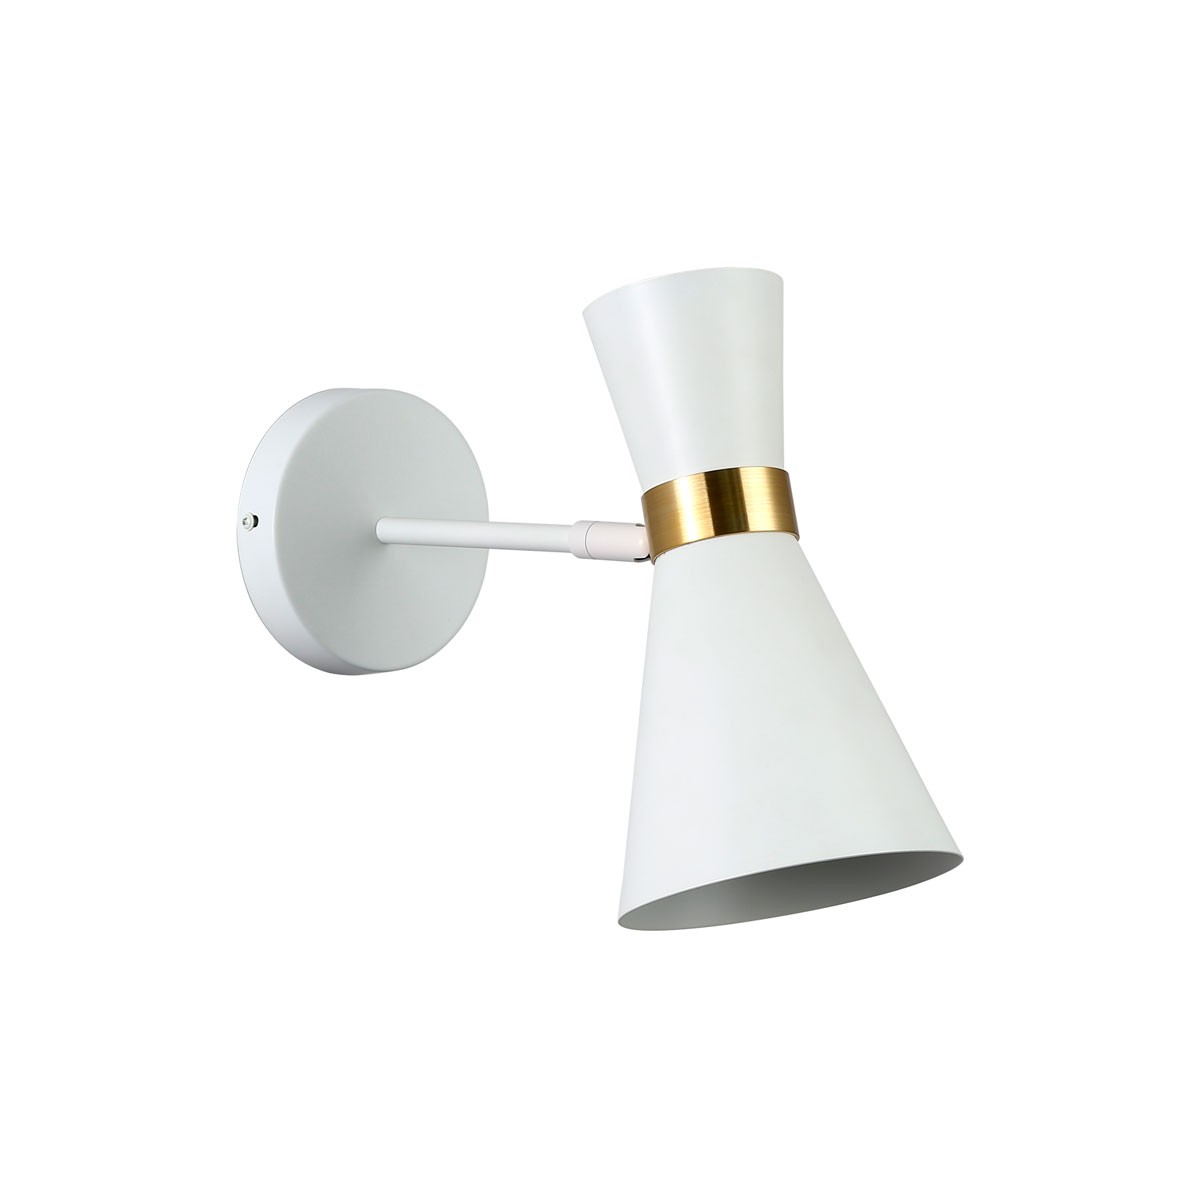 White and gold Nordic style interior wall lamp "Melissa" 29x25cm